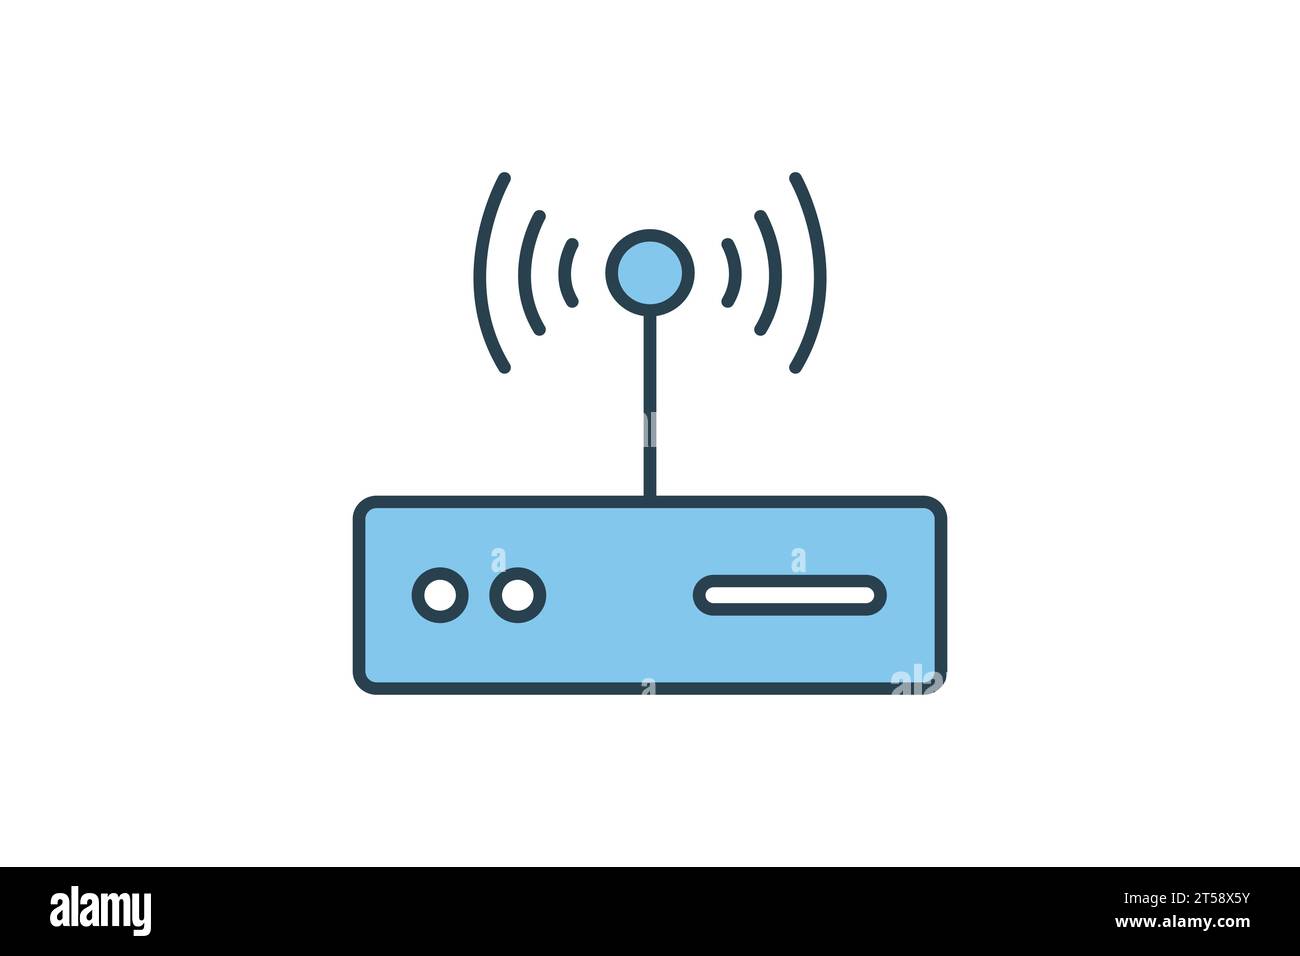 access point router icon. icon related to device, computer technology, network. flat line icon style. simple vector design editable Stock Vector